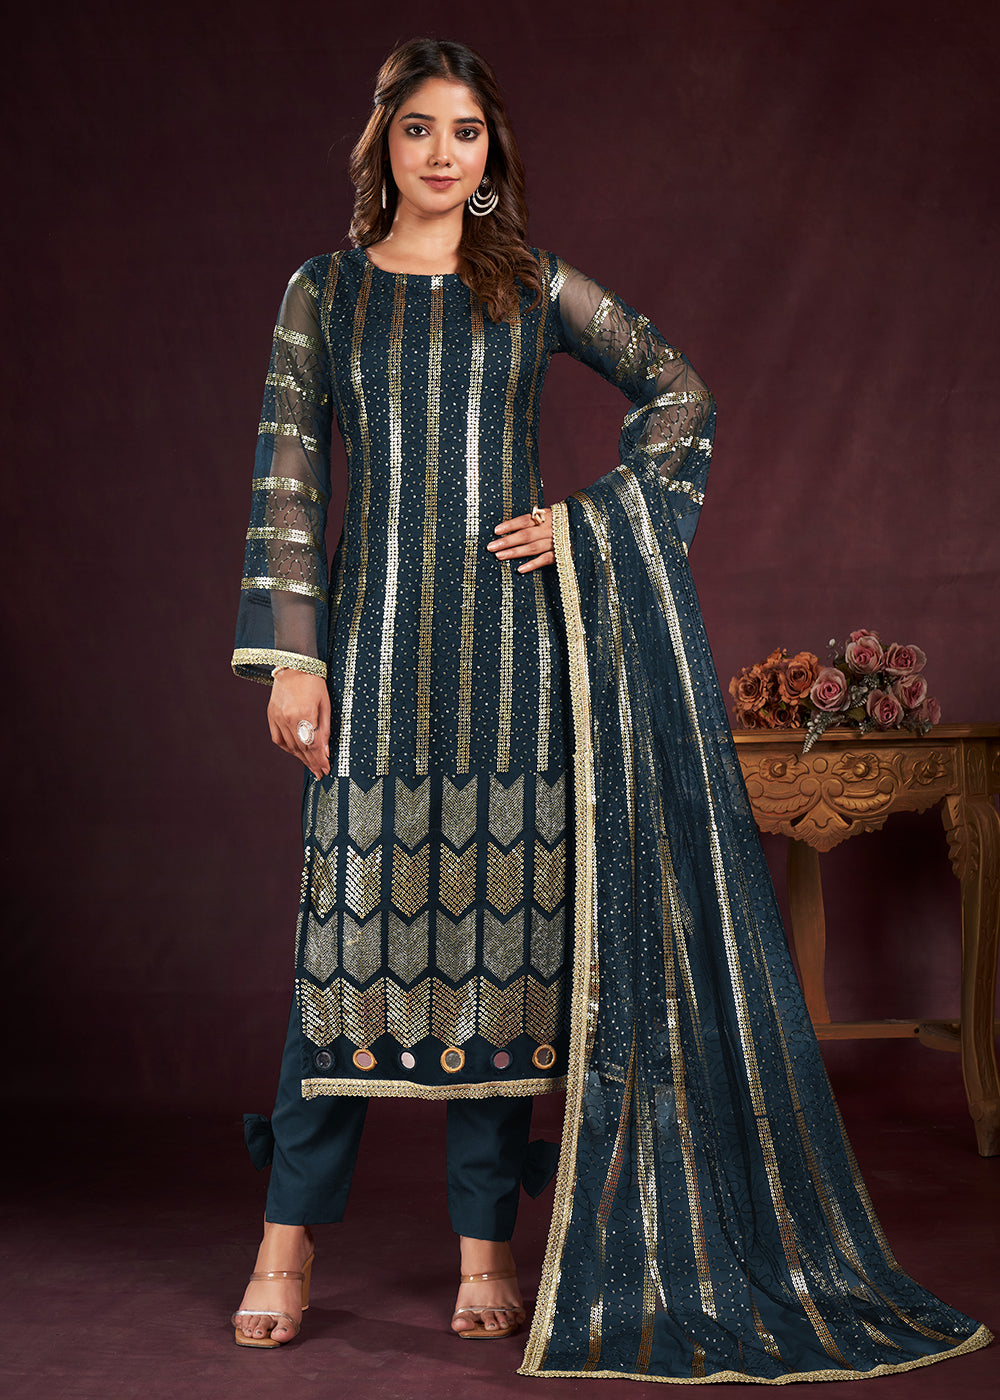 Buy Now Blue Butterfly Net Embroidered Festive Salwar Suit Online in USA, UK, Canada, Germany, Australia & Worldwide at Empress Clothing. 